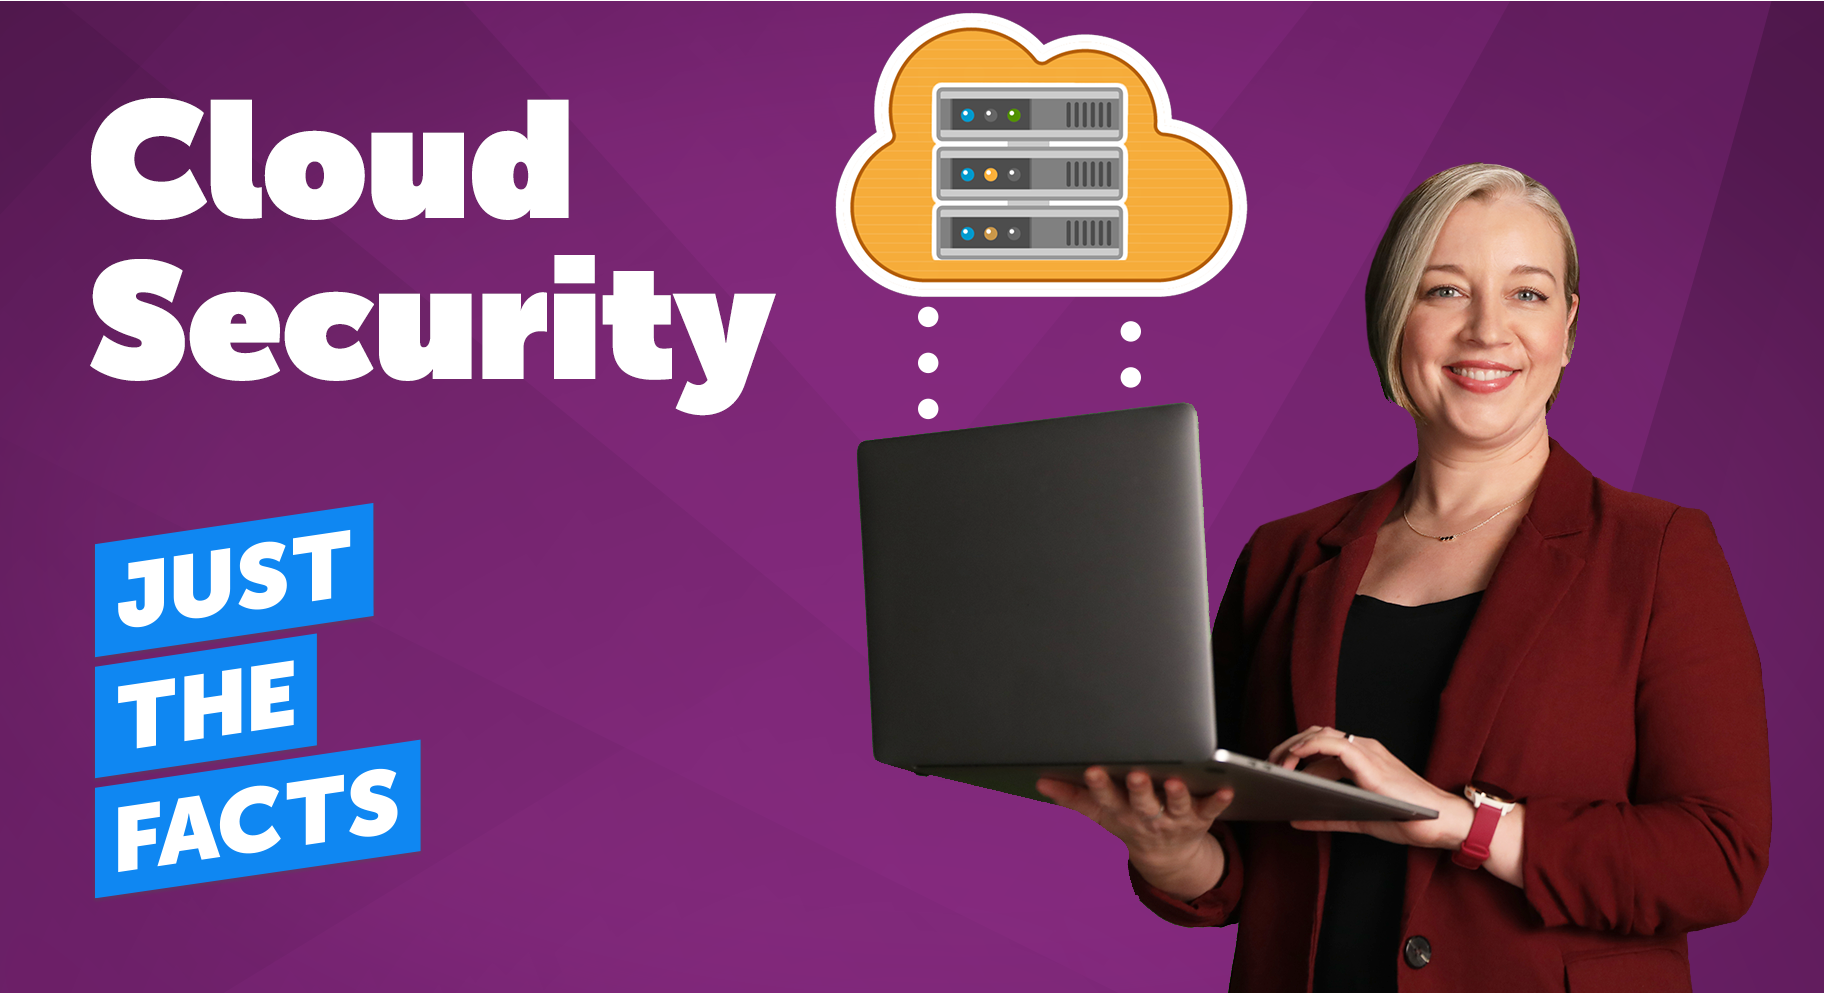 Just the Facts: Cloud Security